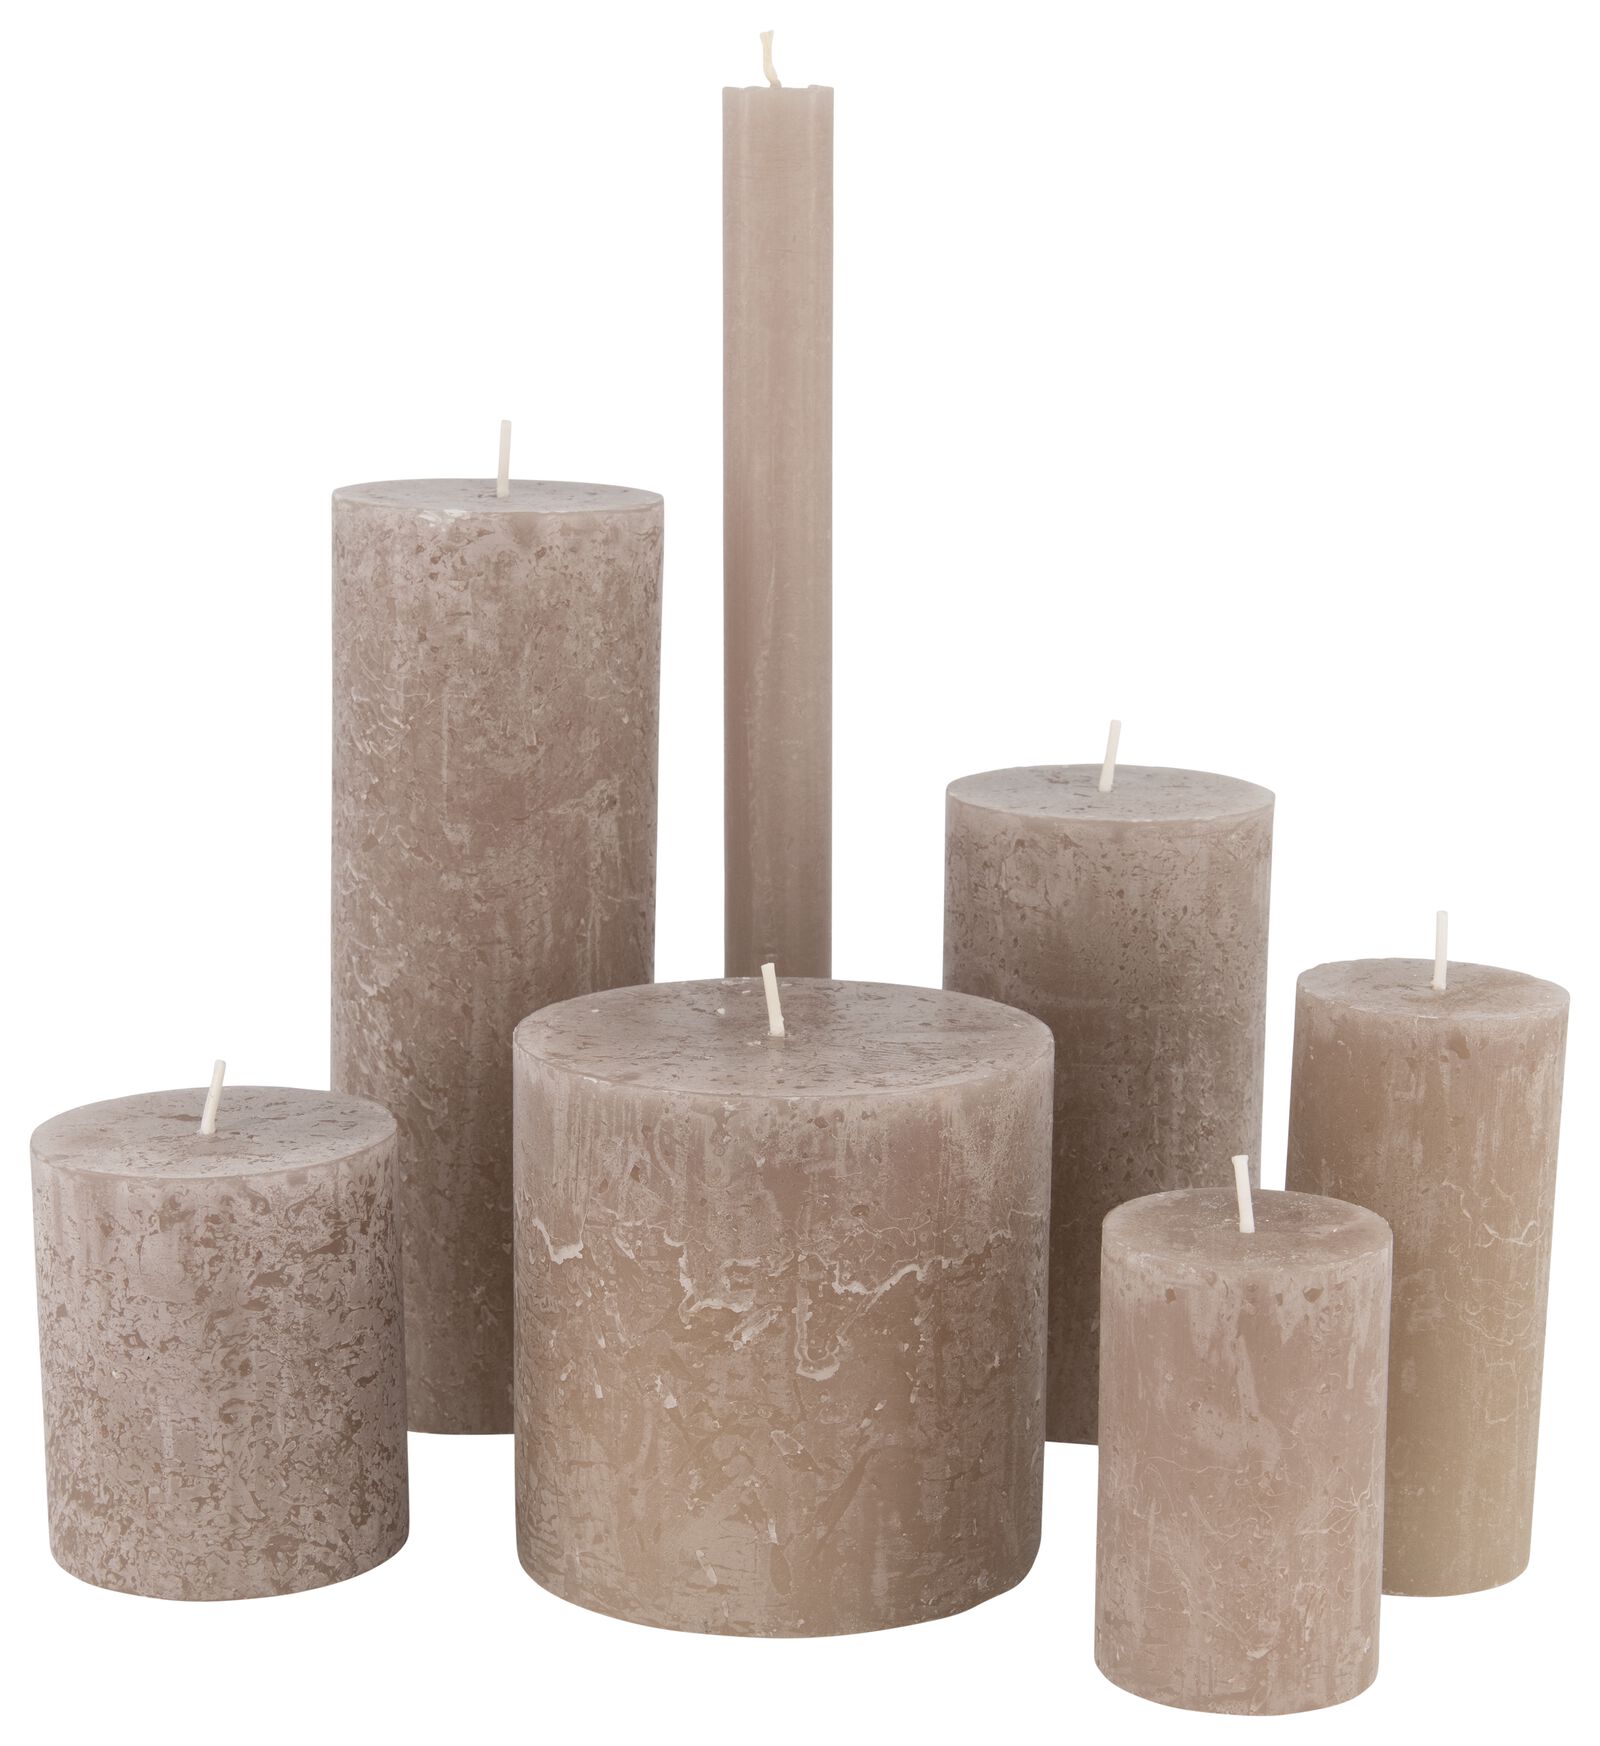 bougie rustique - 7x19 - taupe taupe 7 x 19 - 13502437 - HEMA